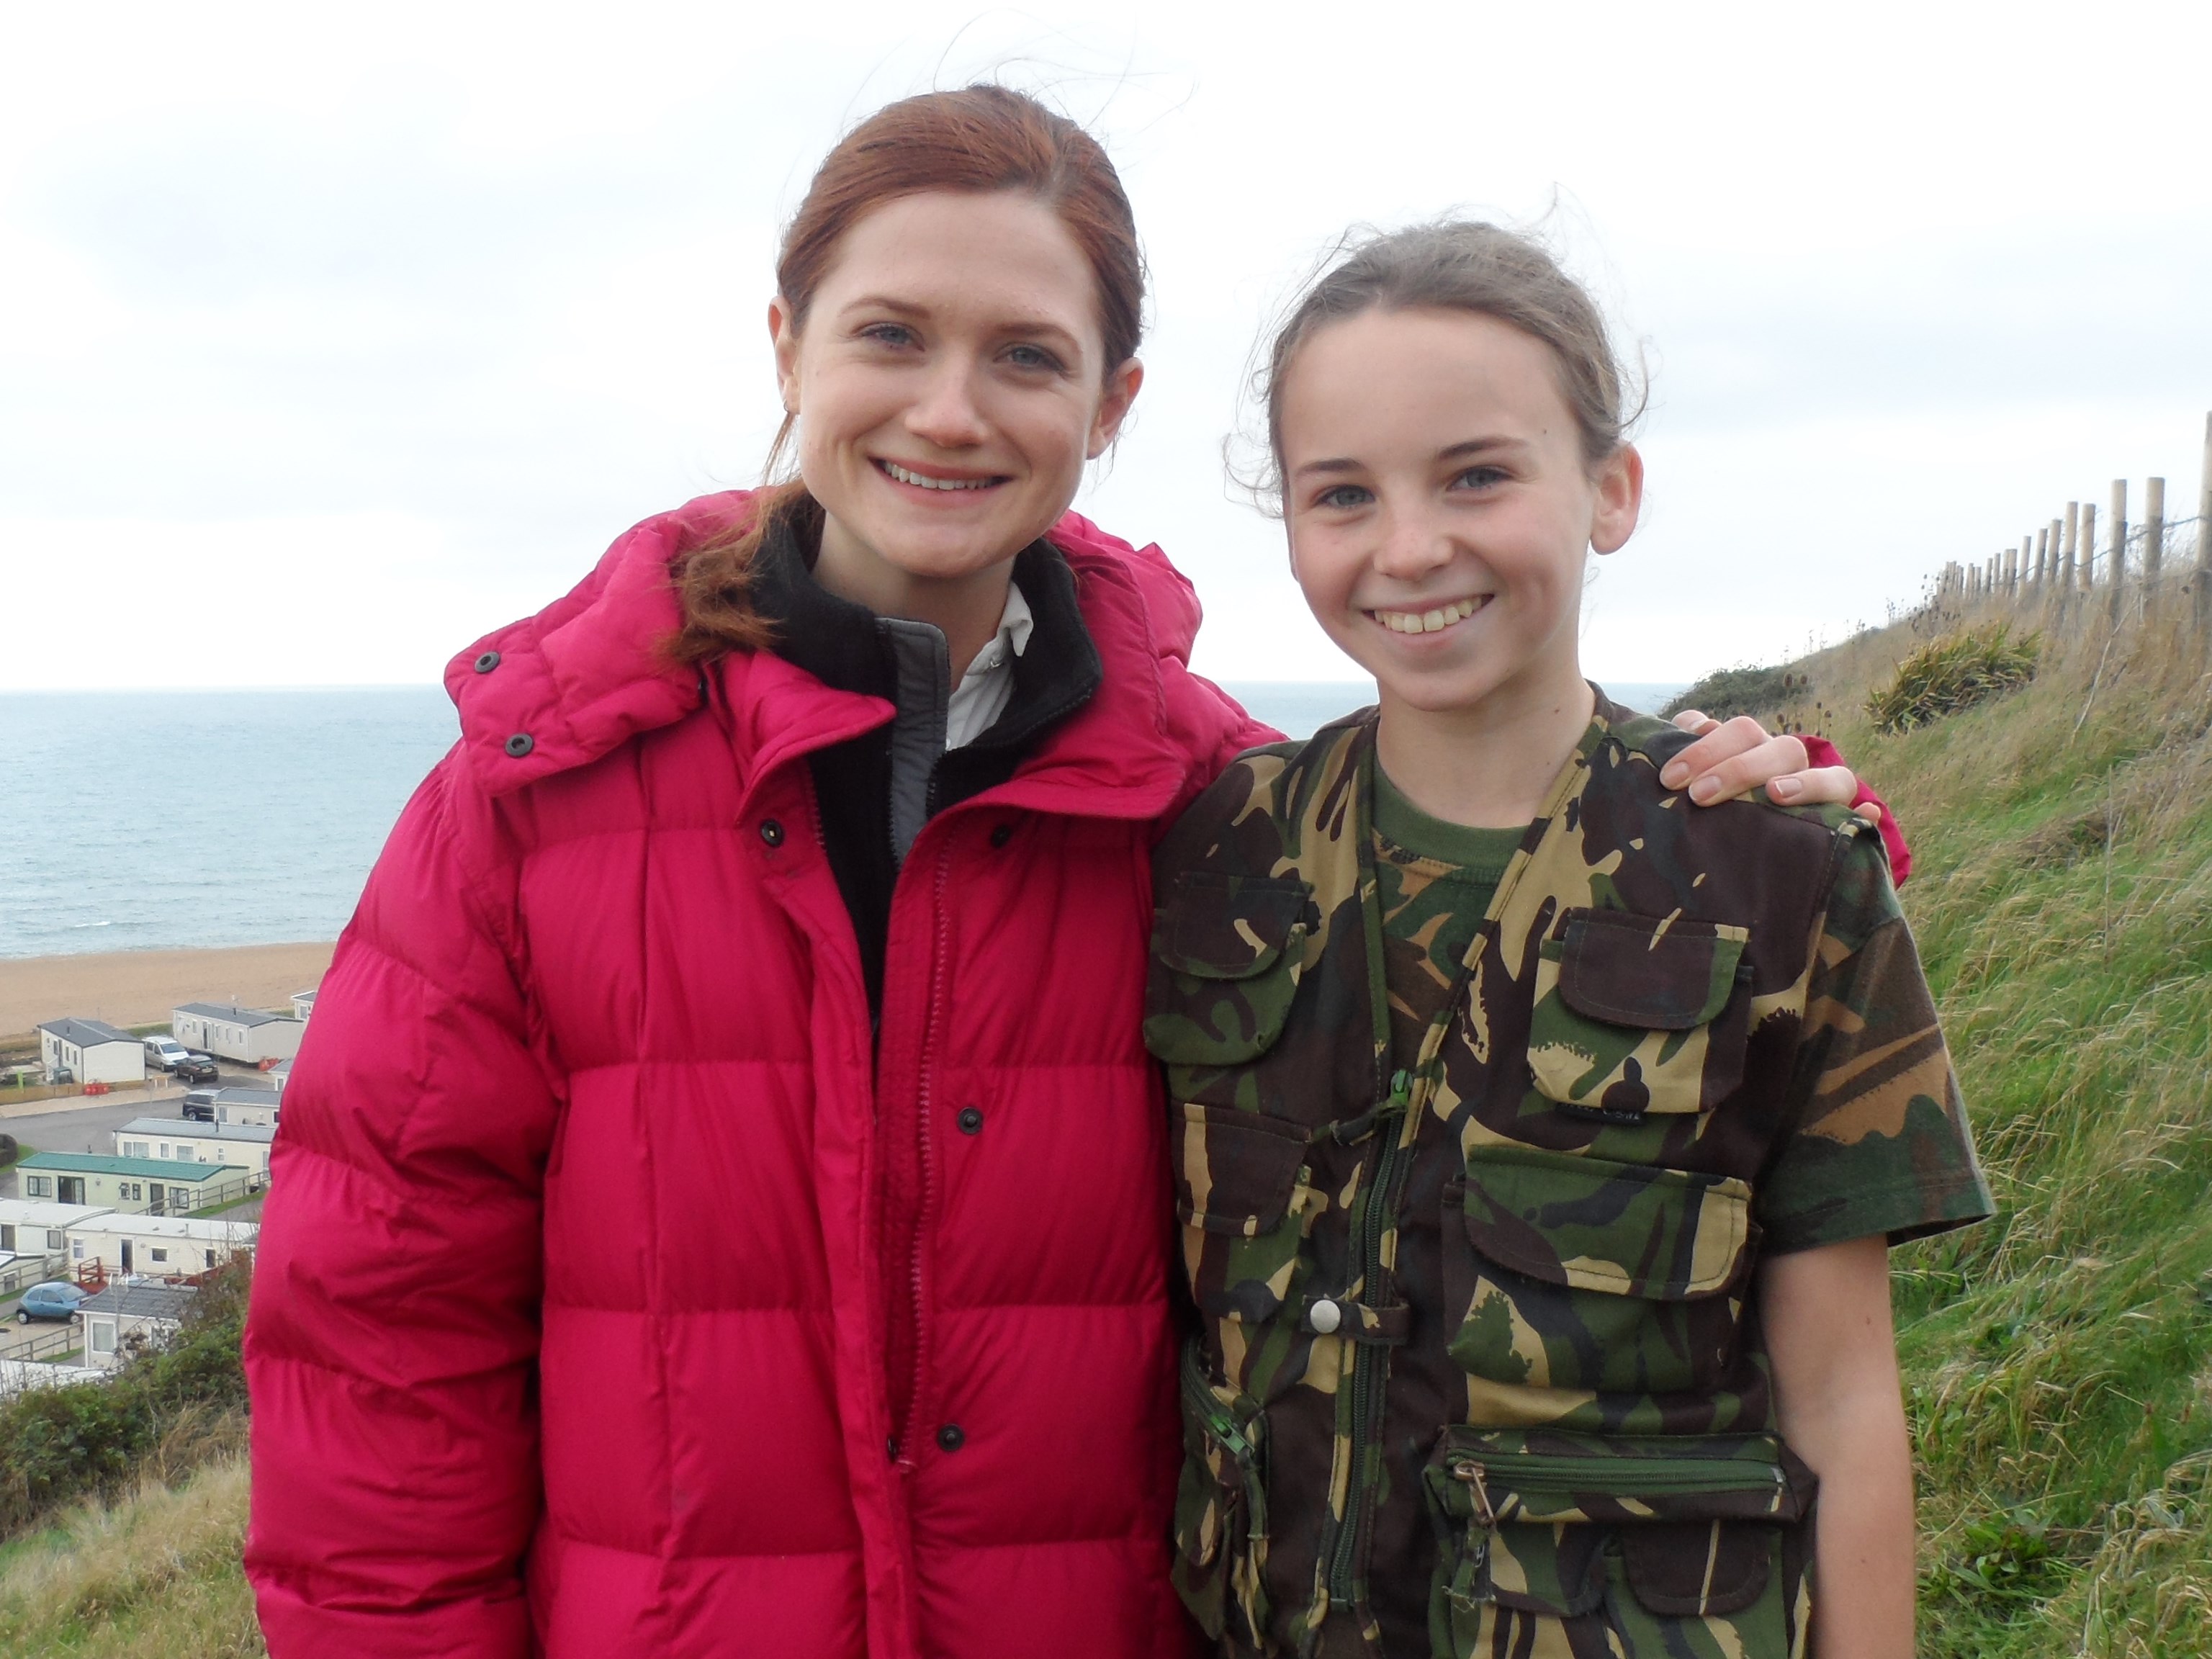 Hattie and Bonnie Wright for Who Killed Nelson Nutmeg?